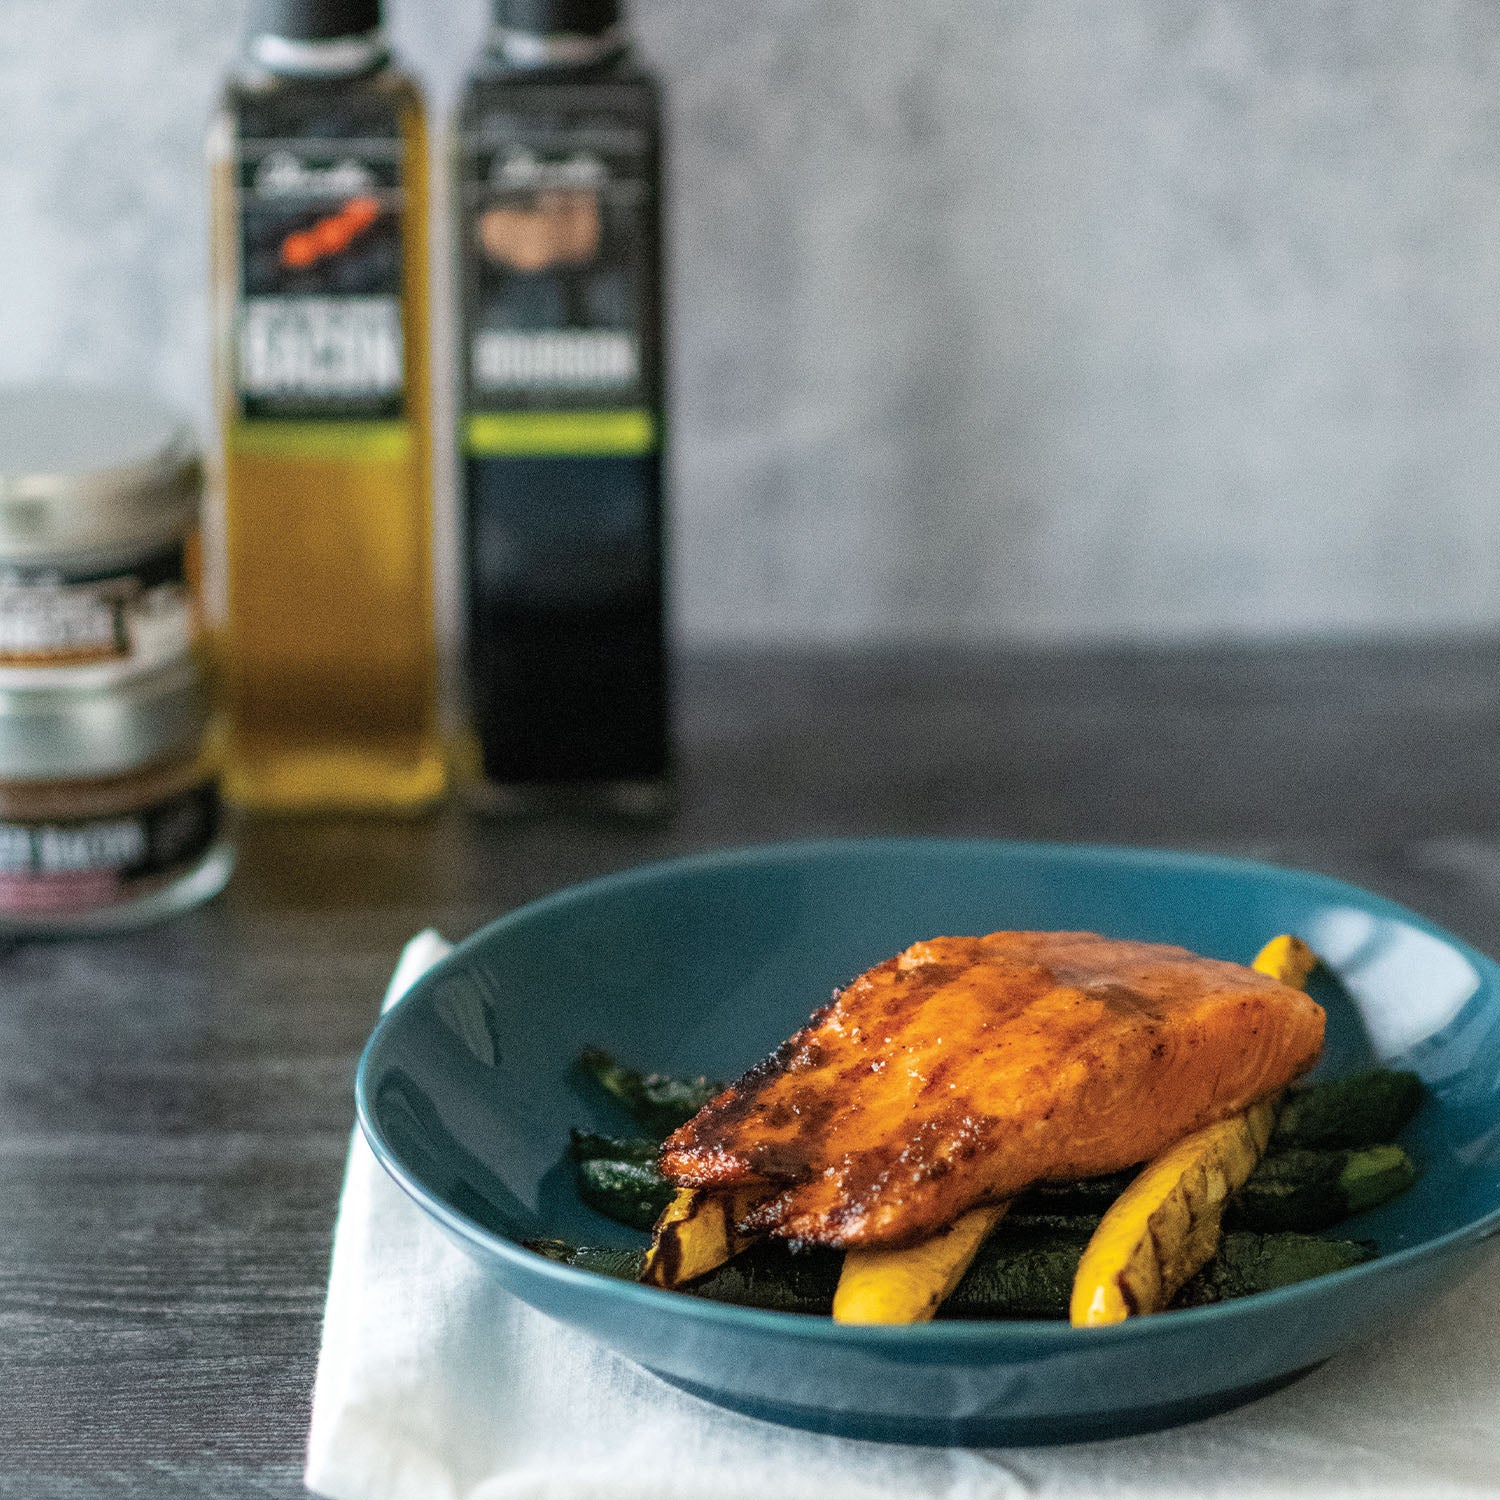 Grilled Salmon and Squash with Brown Sugar Bourbon Glaze